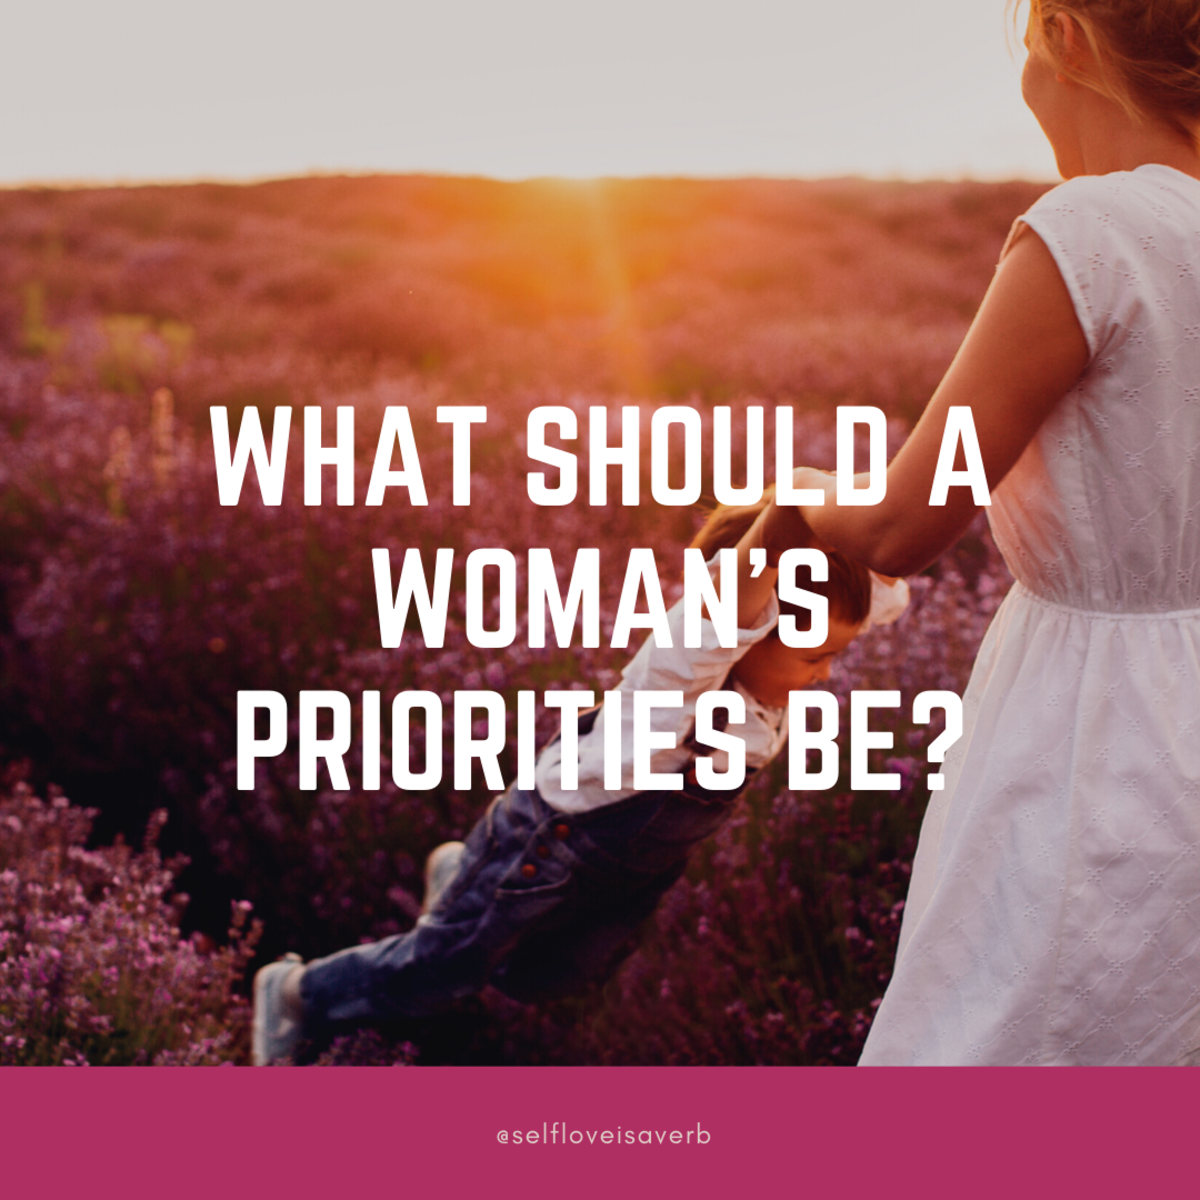 What Should a Woman's Priorities Be?